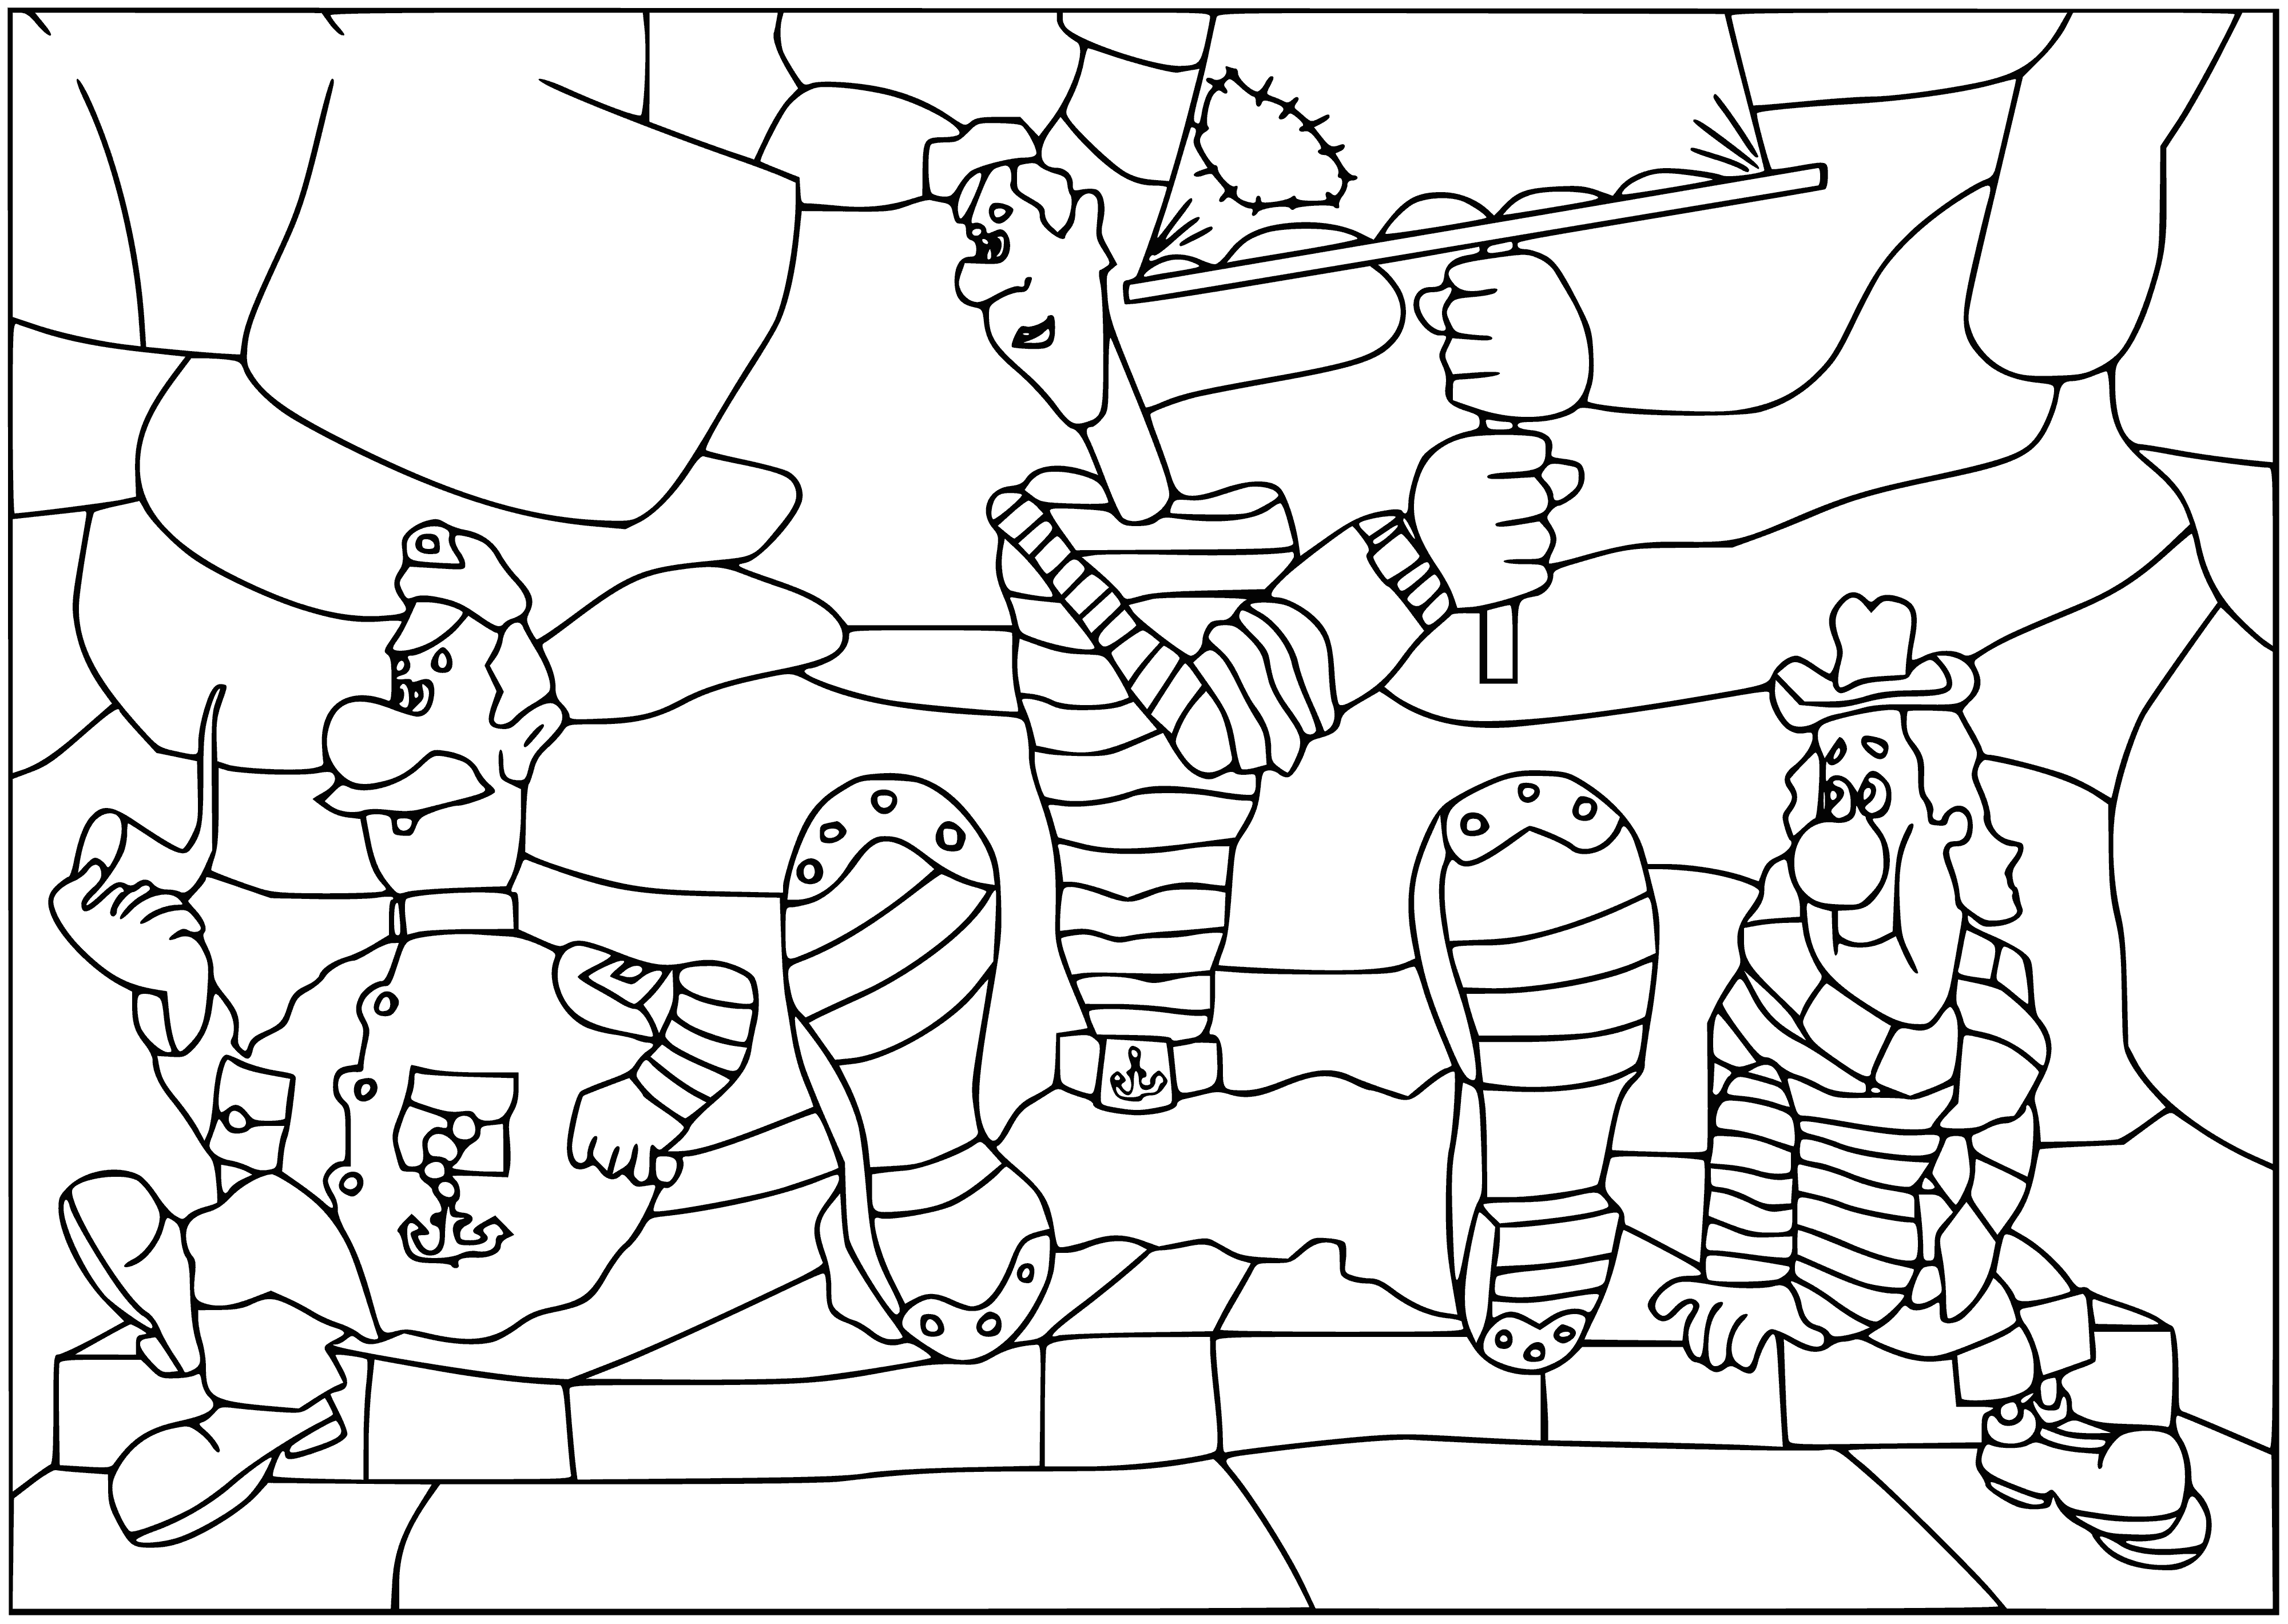 coloring page: Boy and girl playing in park, laughing and having a great time. Girl on a swing, boy chasing a butterfly.